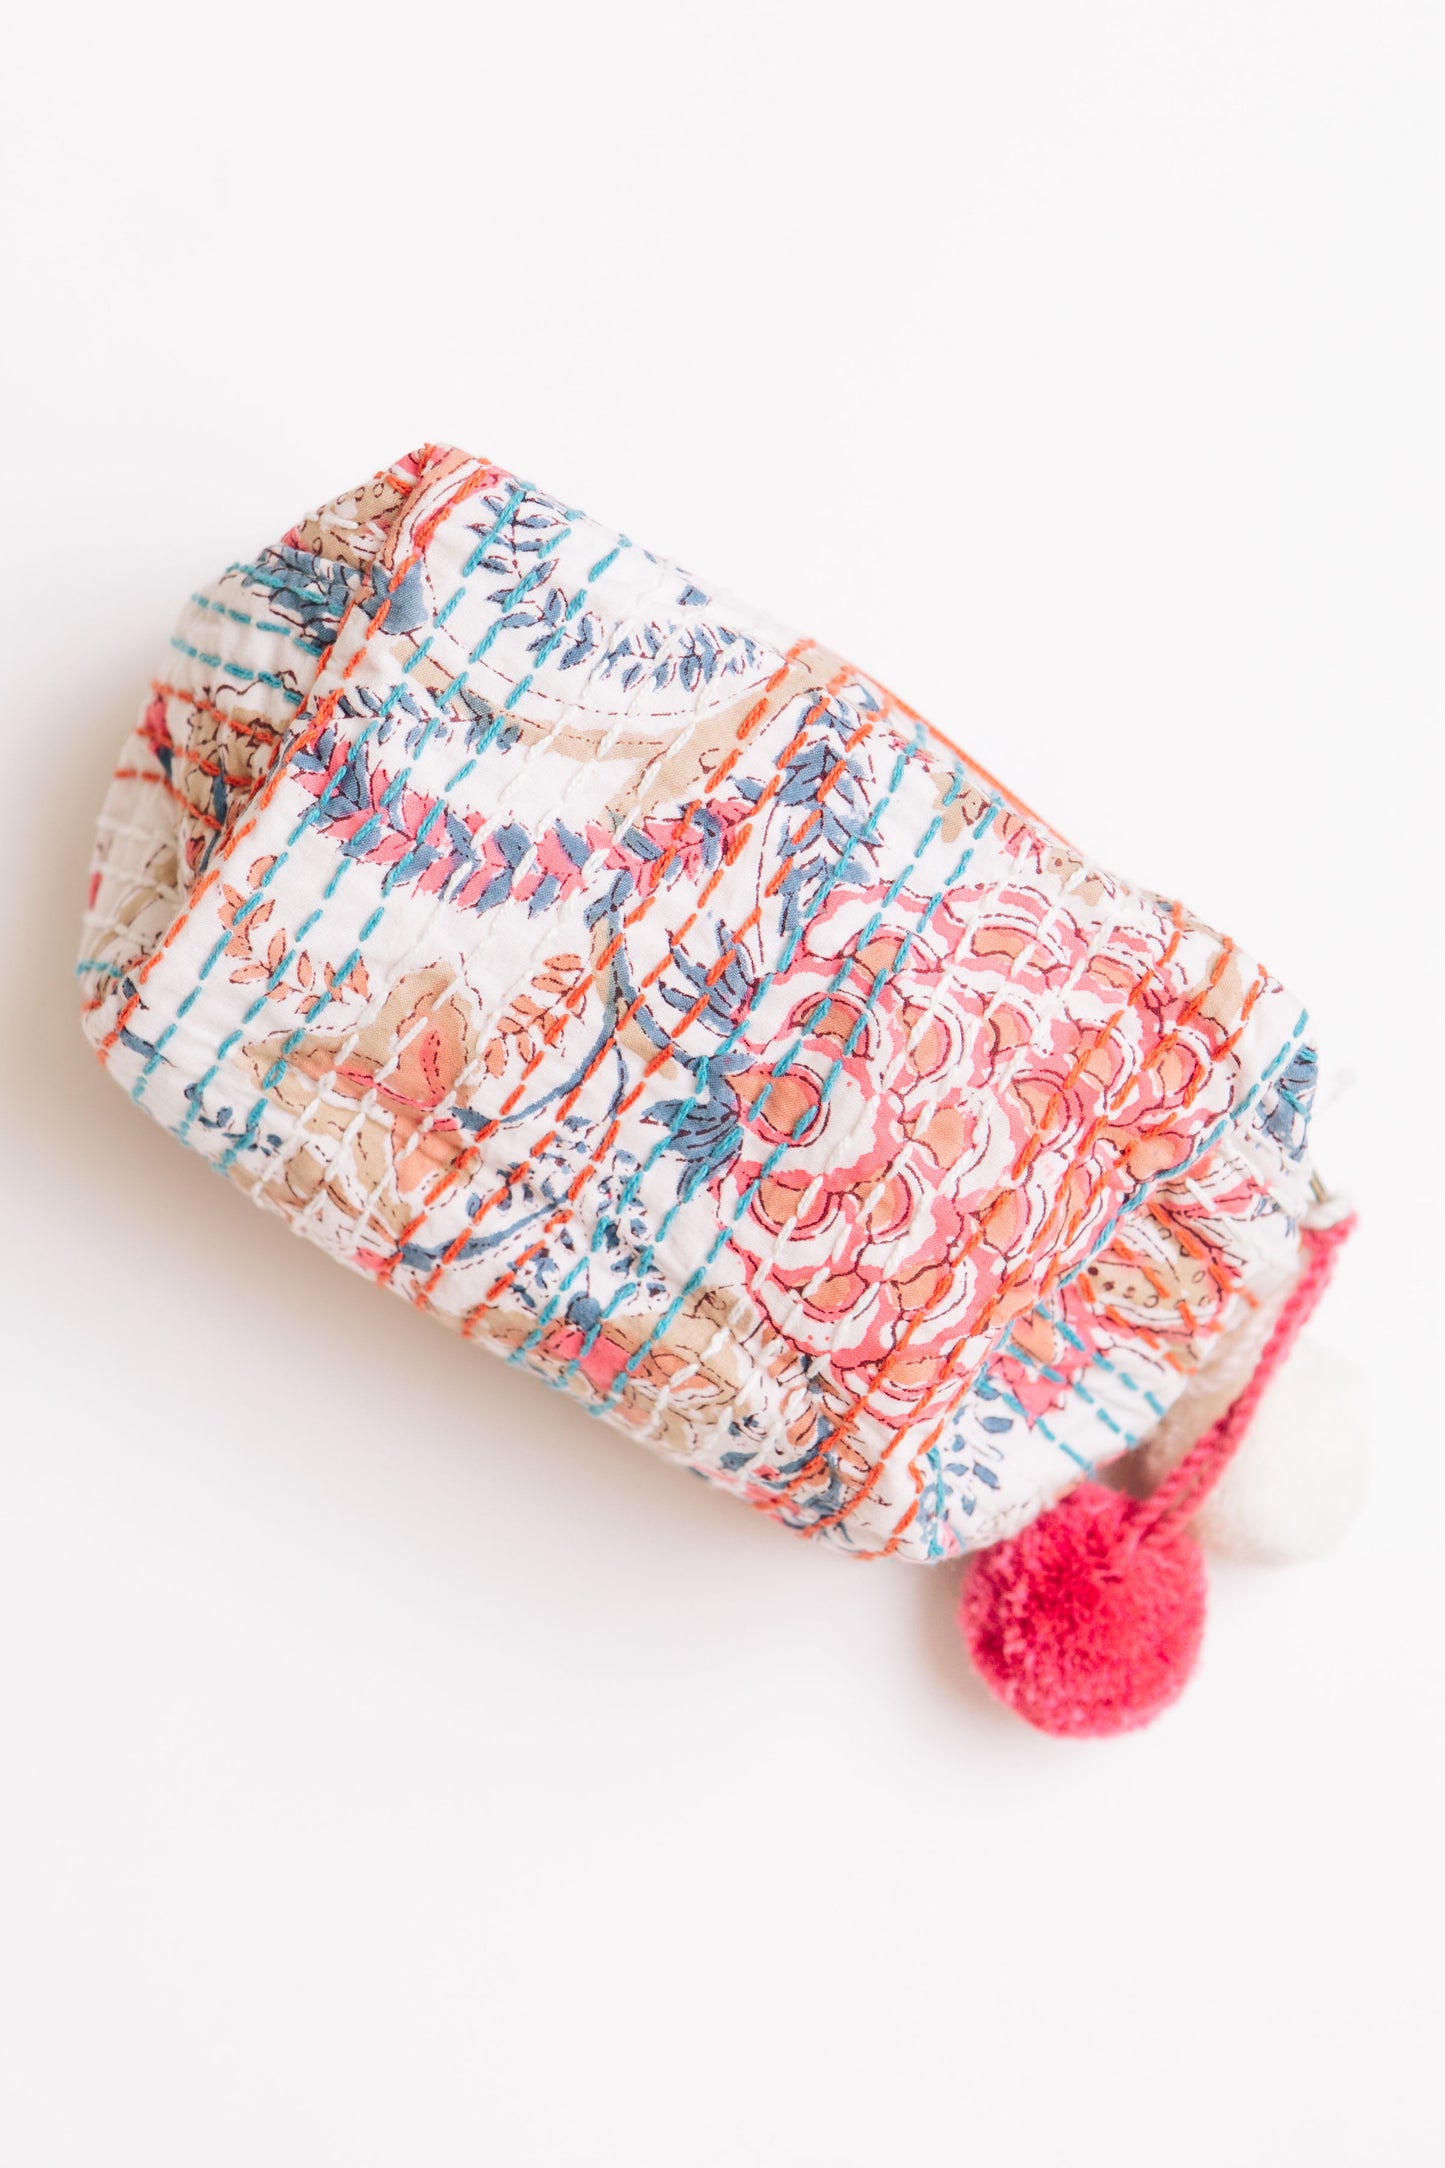 Floral Kantha Stitched Cosmetic Bag